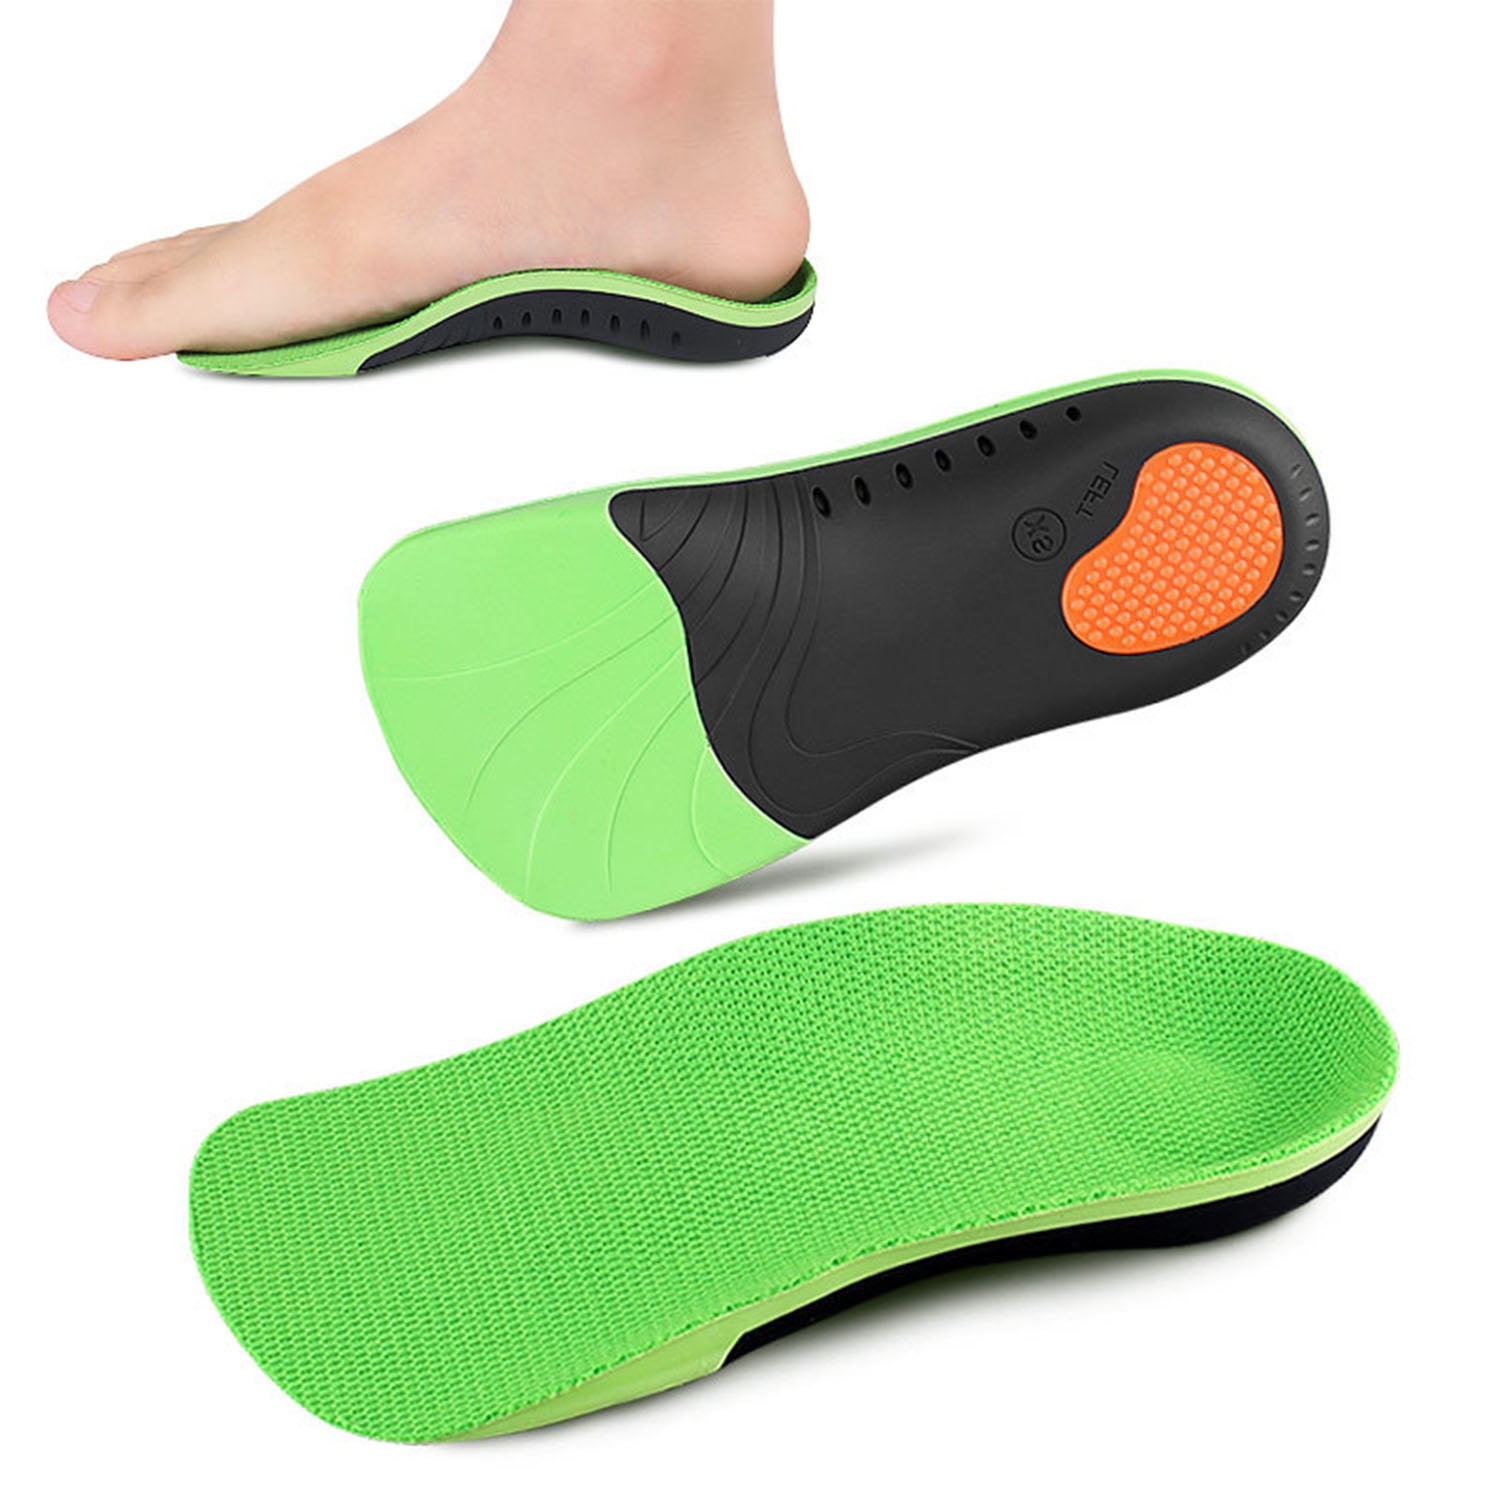 Orthotic Insoles Shoe Inserts Arch Supports for Plantar Fasciitis and Heel Pain 